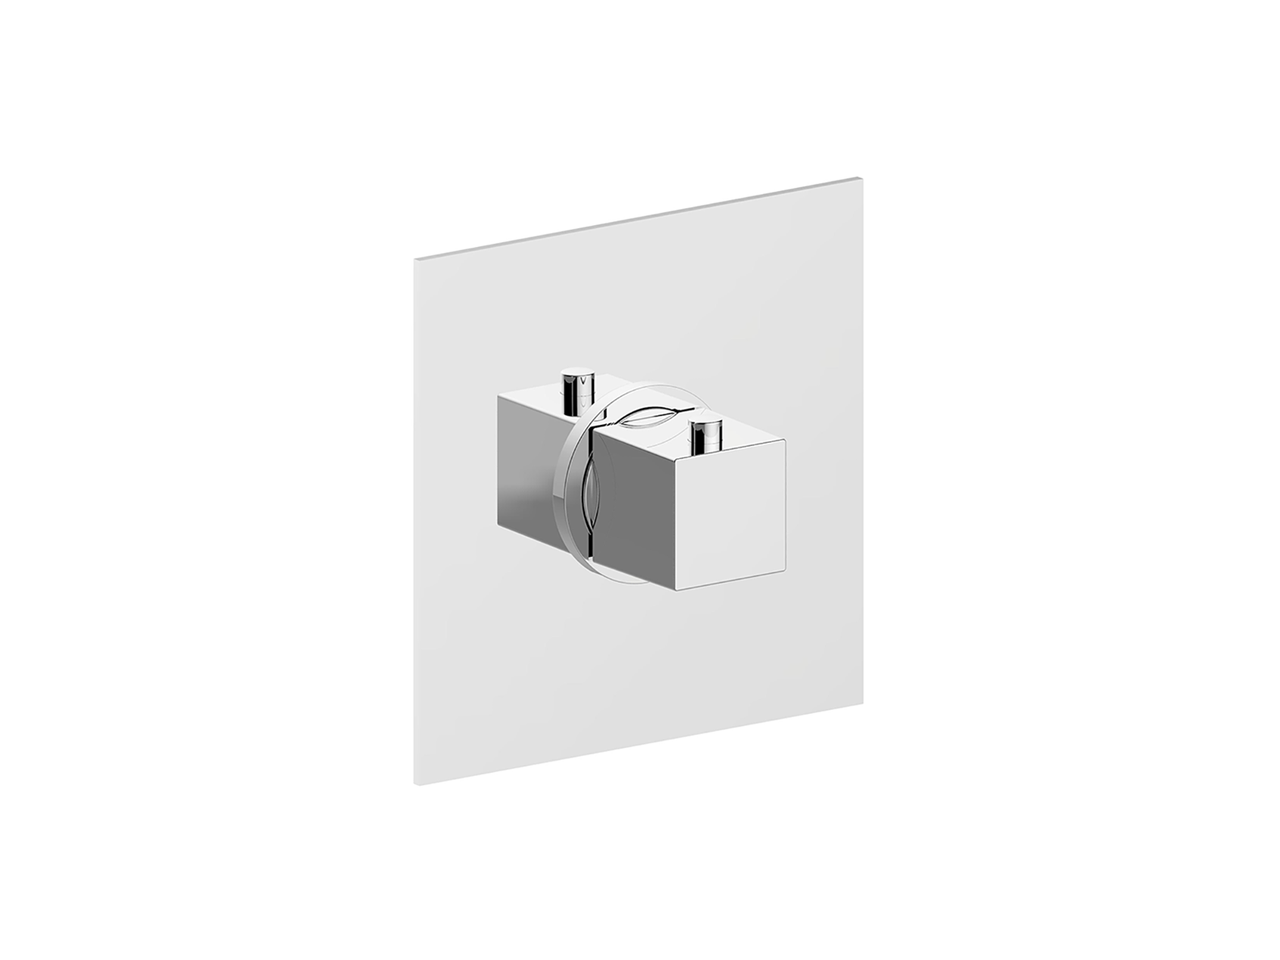 Exposed part for concealed thermo shower valve NUOVA EGO - v1